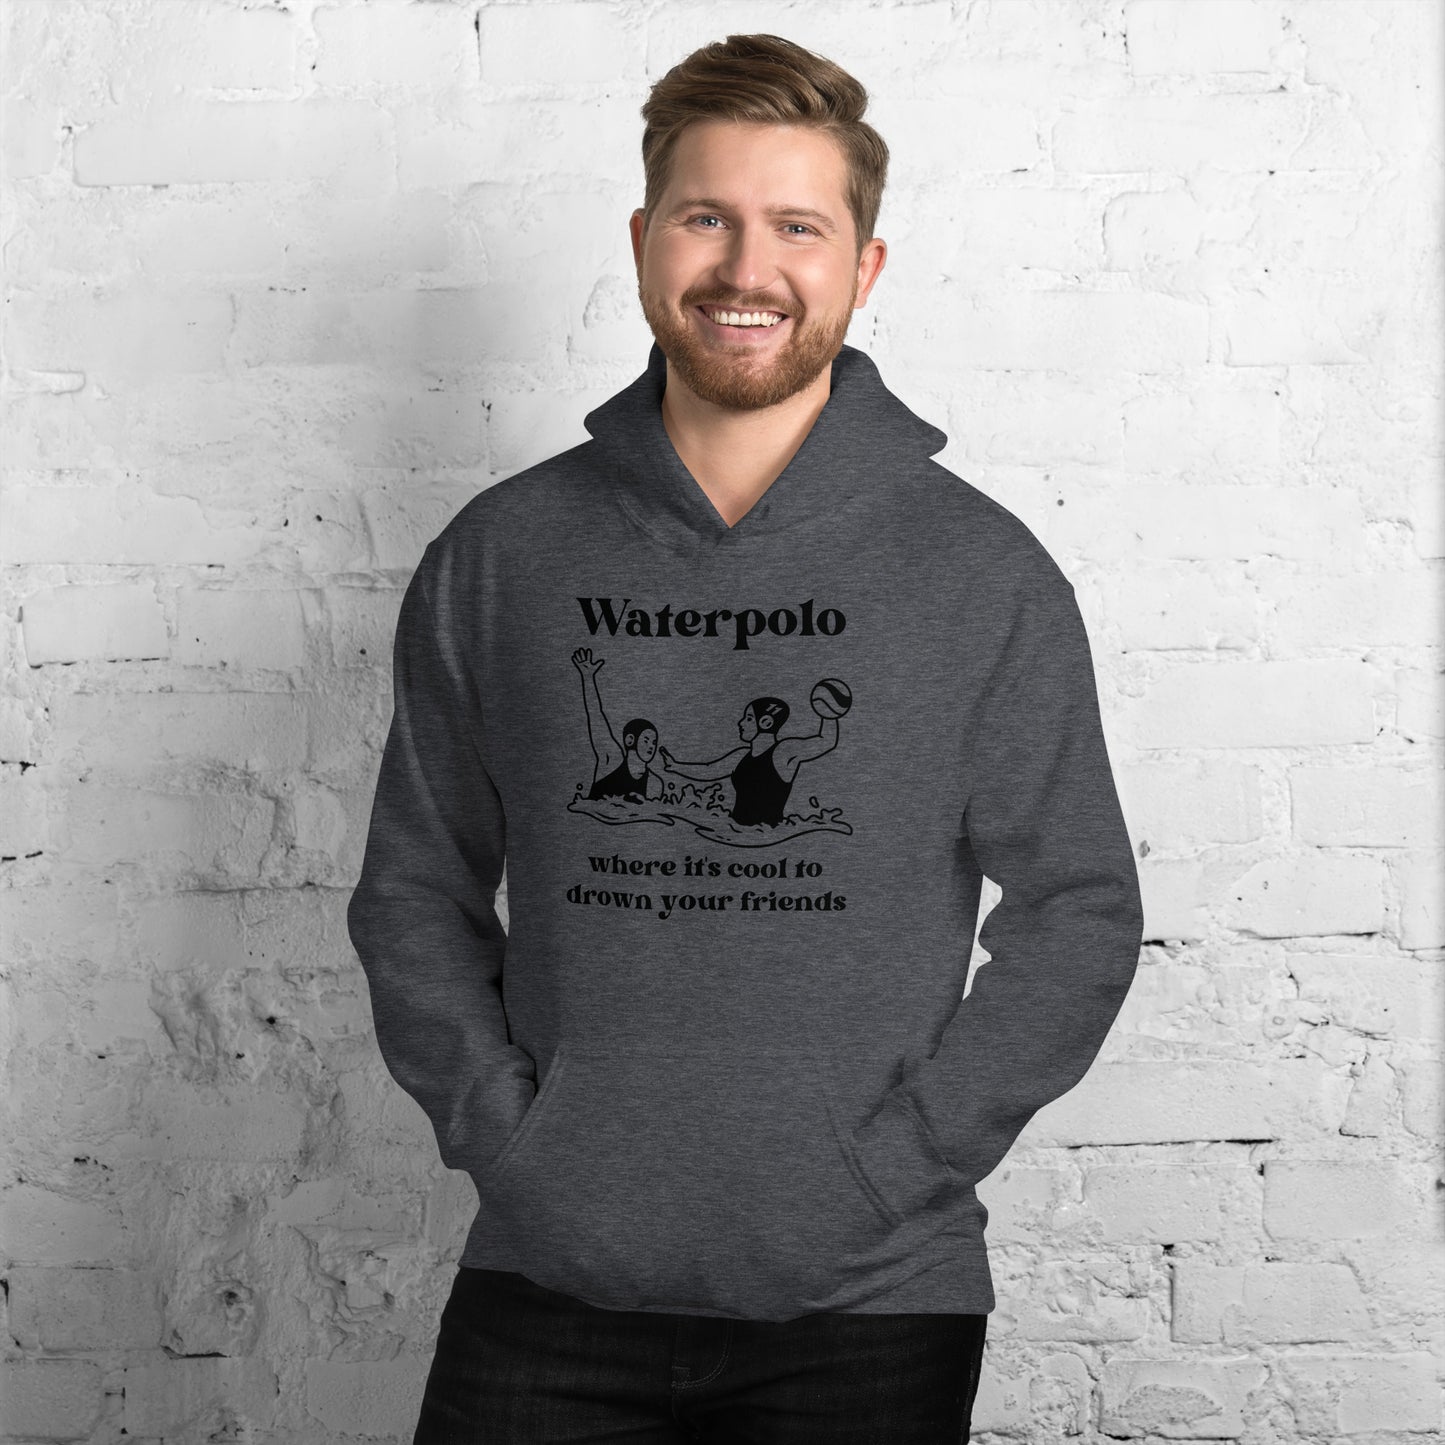 Waterpolo, where it's cool to drown your friends - Unisex Heavy Blend Hoodie - Gildan 18500